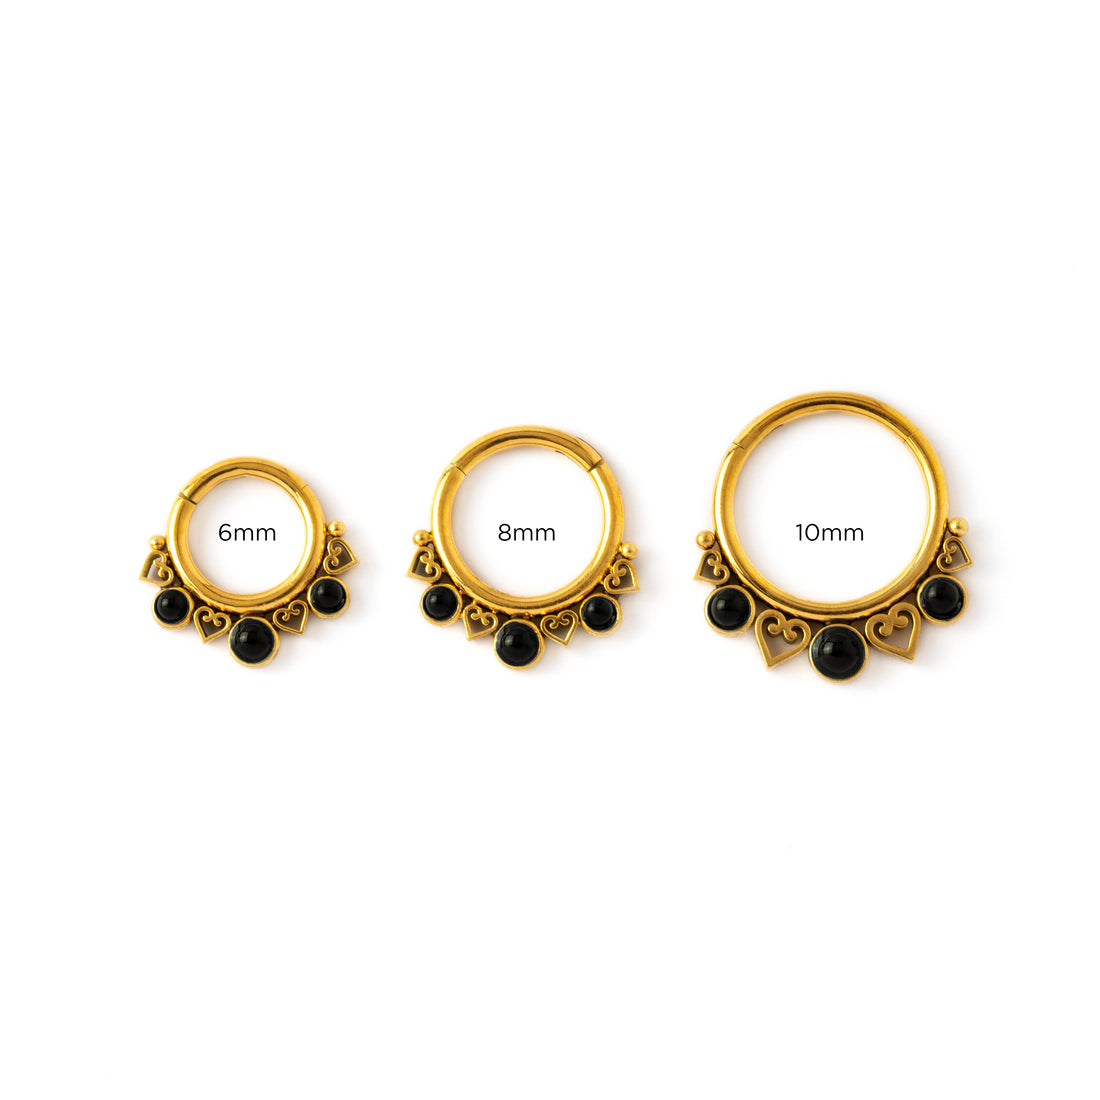 6mm, 8mm, 10mm Golden Neptune Septum Clickers with black Onyx frontal view